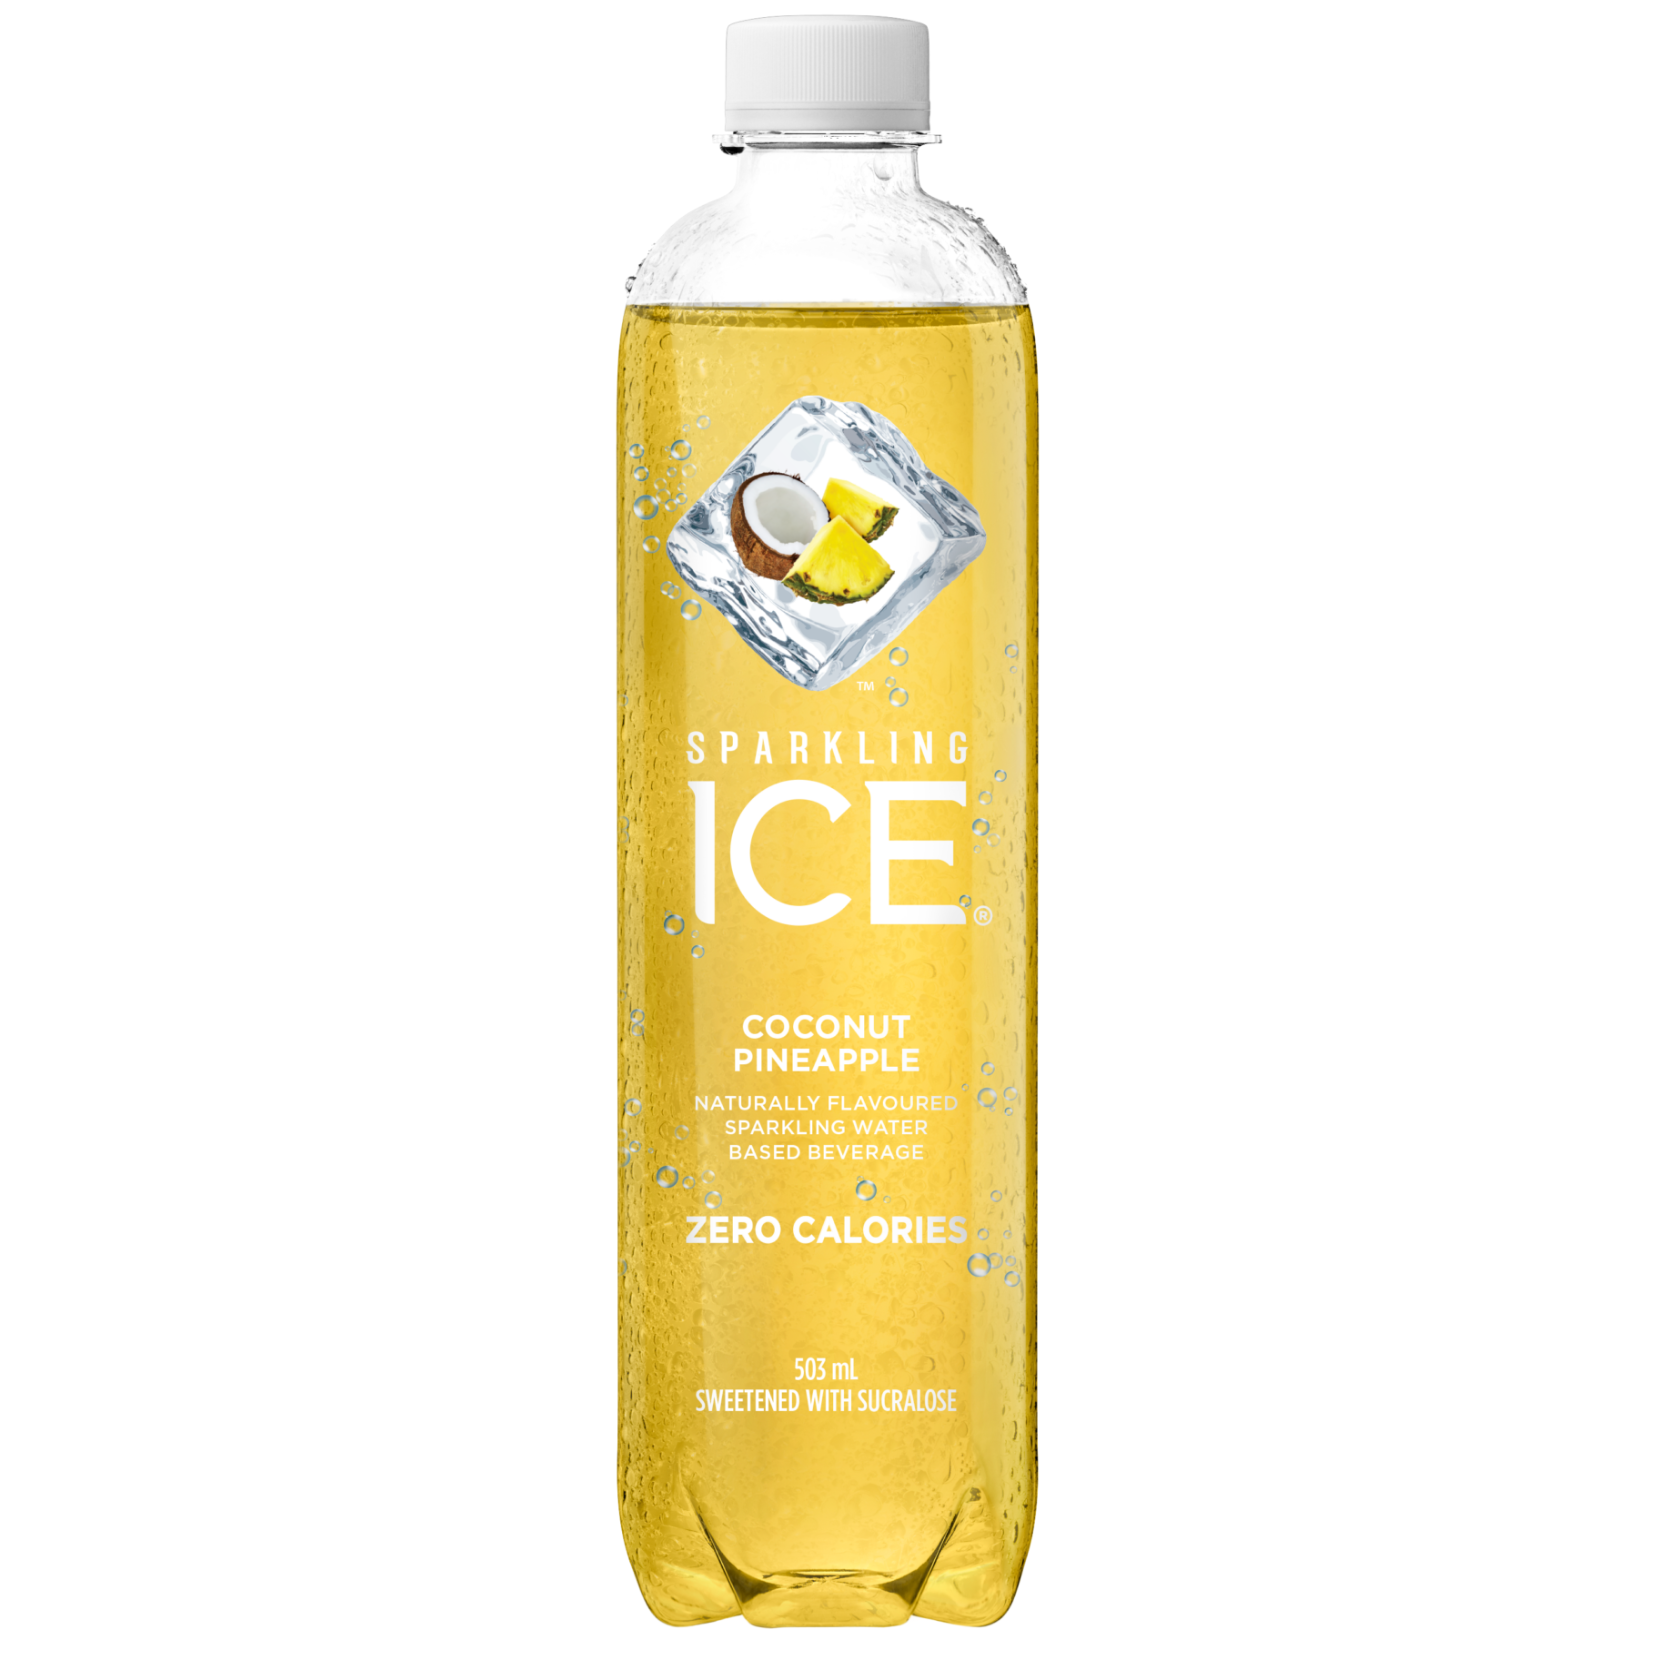 Sparkling Ice Coconut Pineapple Sparkling Water 503ml